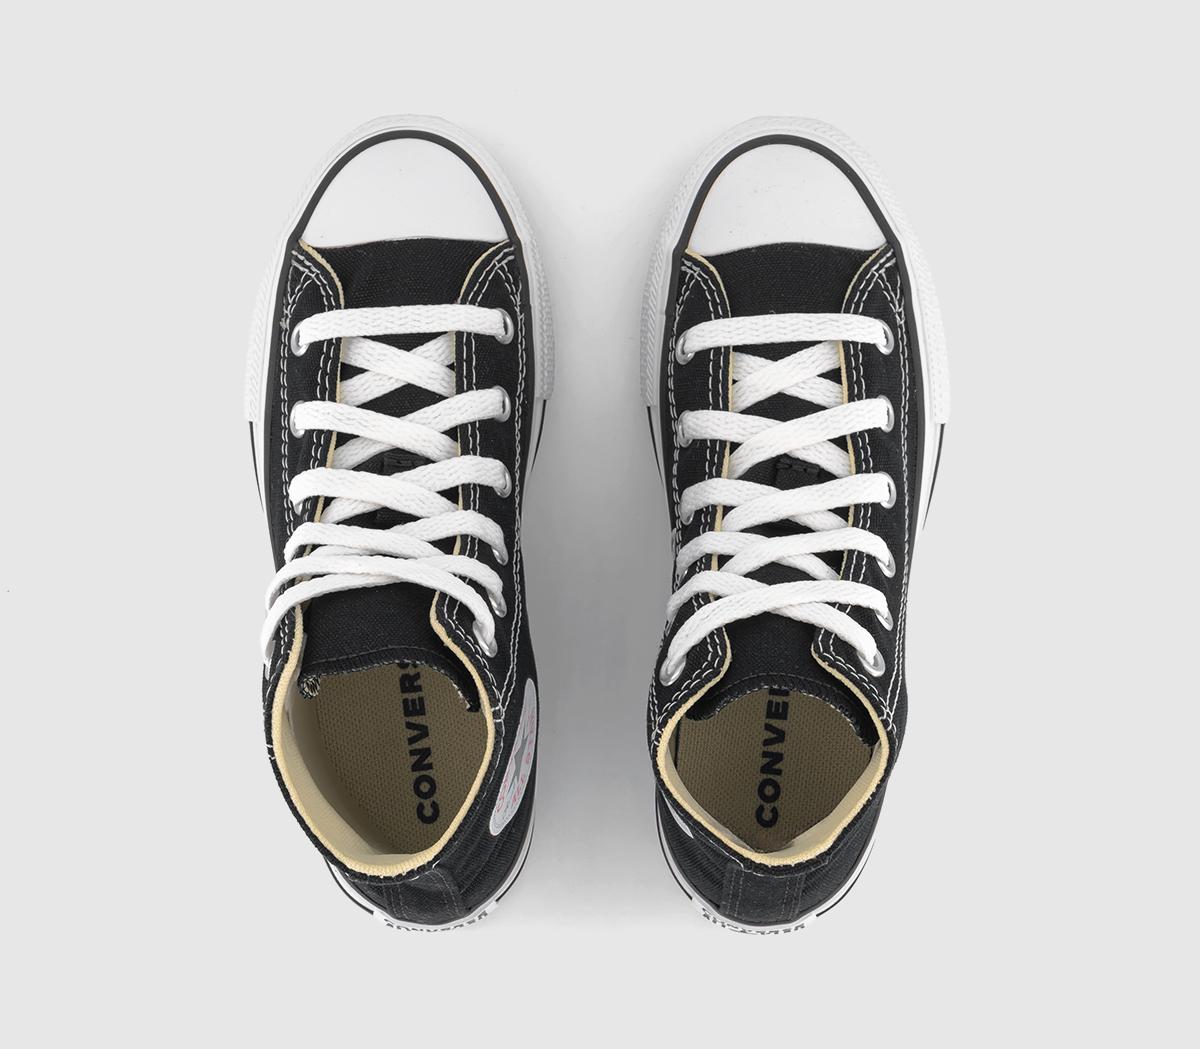 Converse All Star Hi Youth Trainers Black White - Unisex